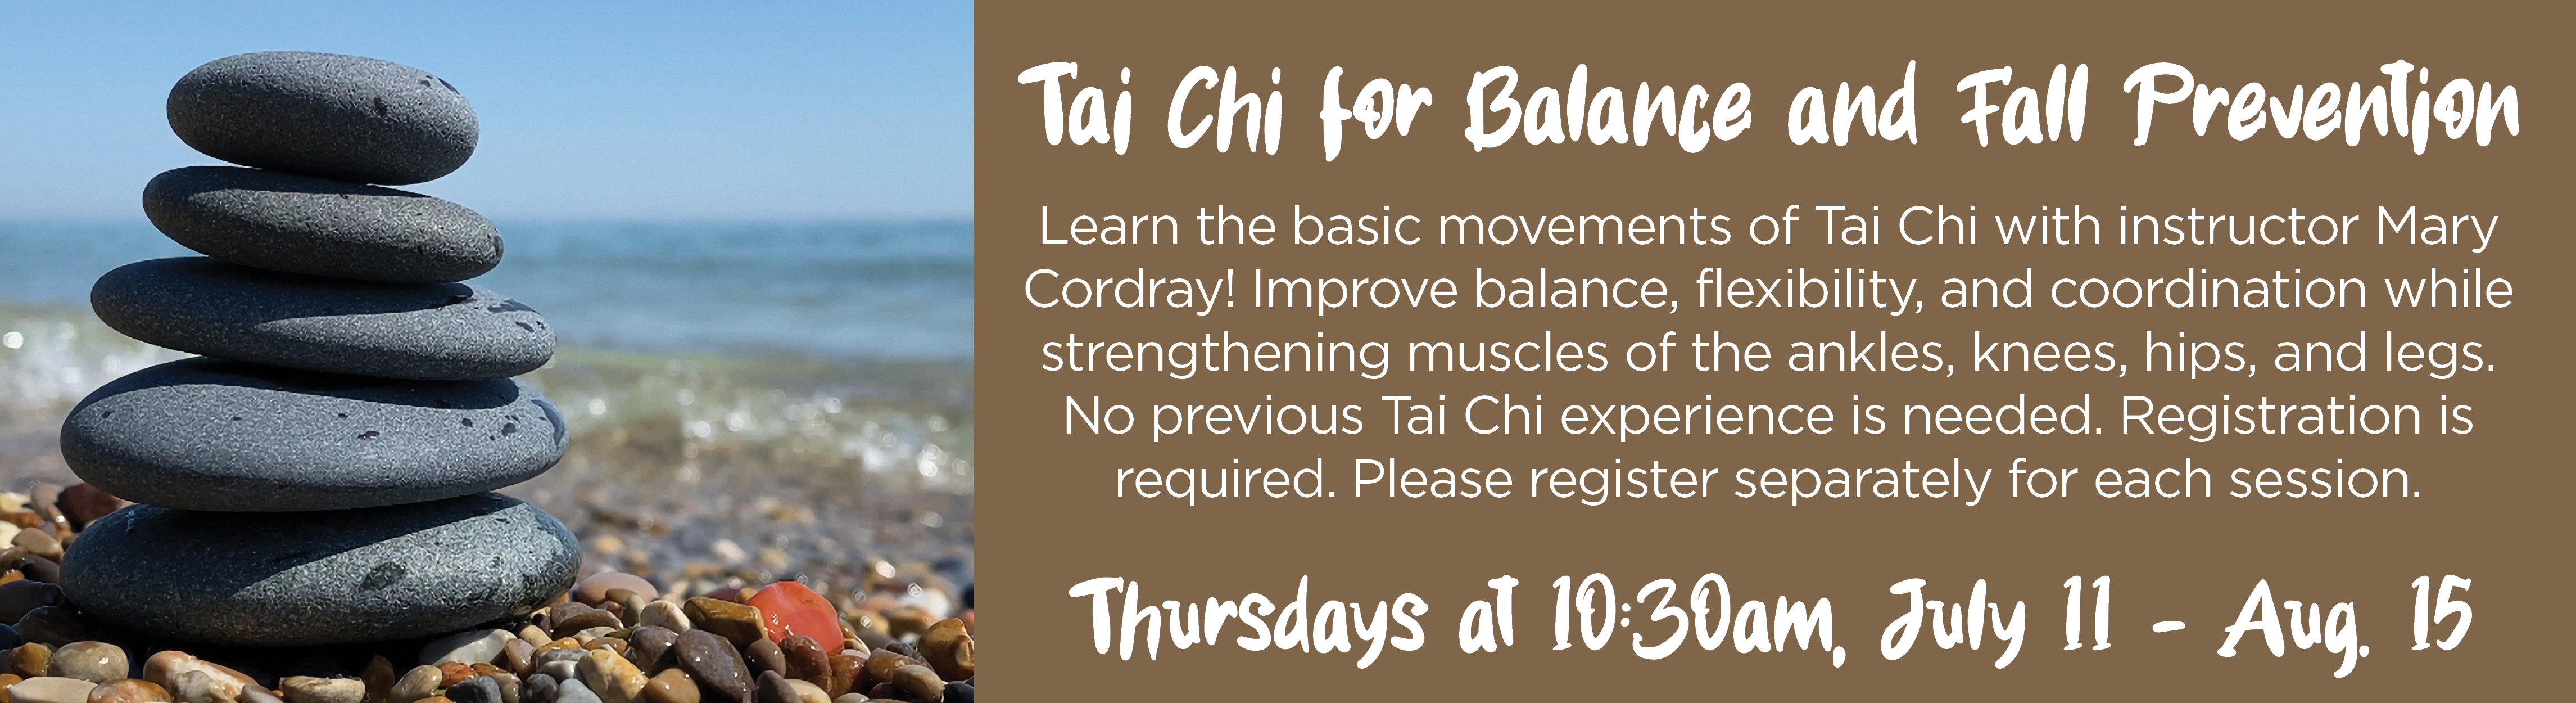 Tai Chi for Balance and Fall Prevention